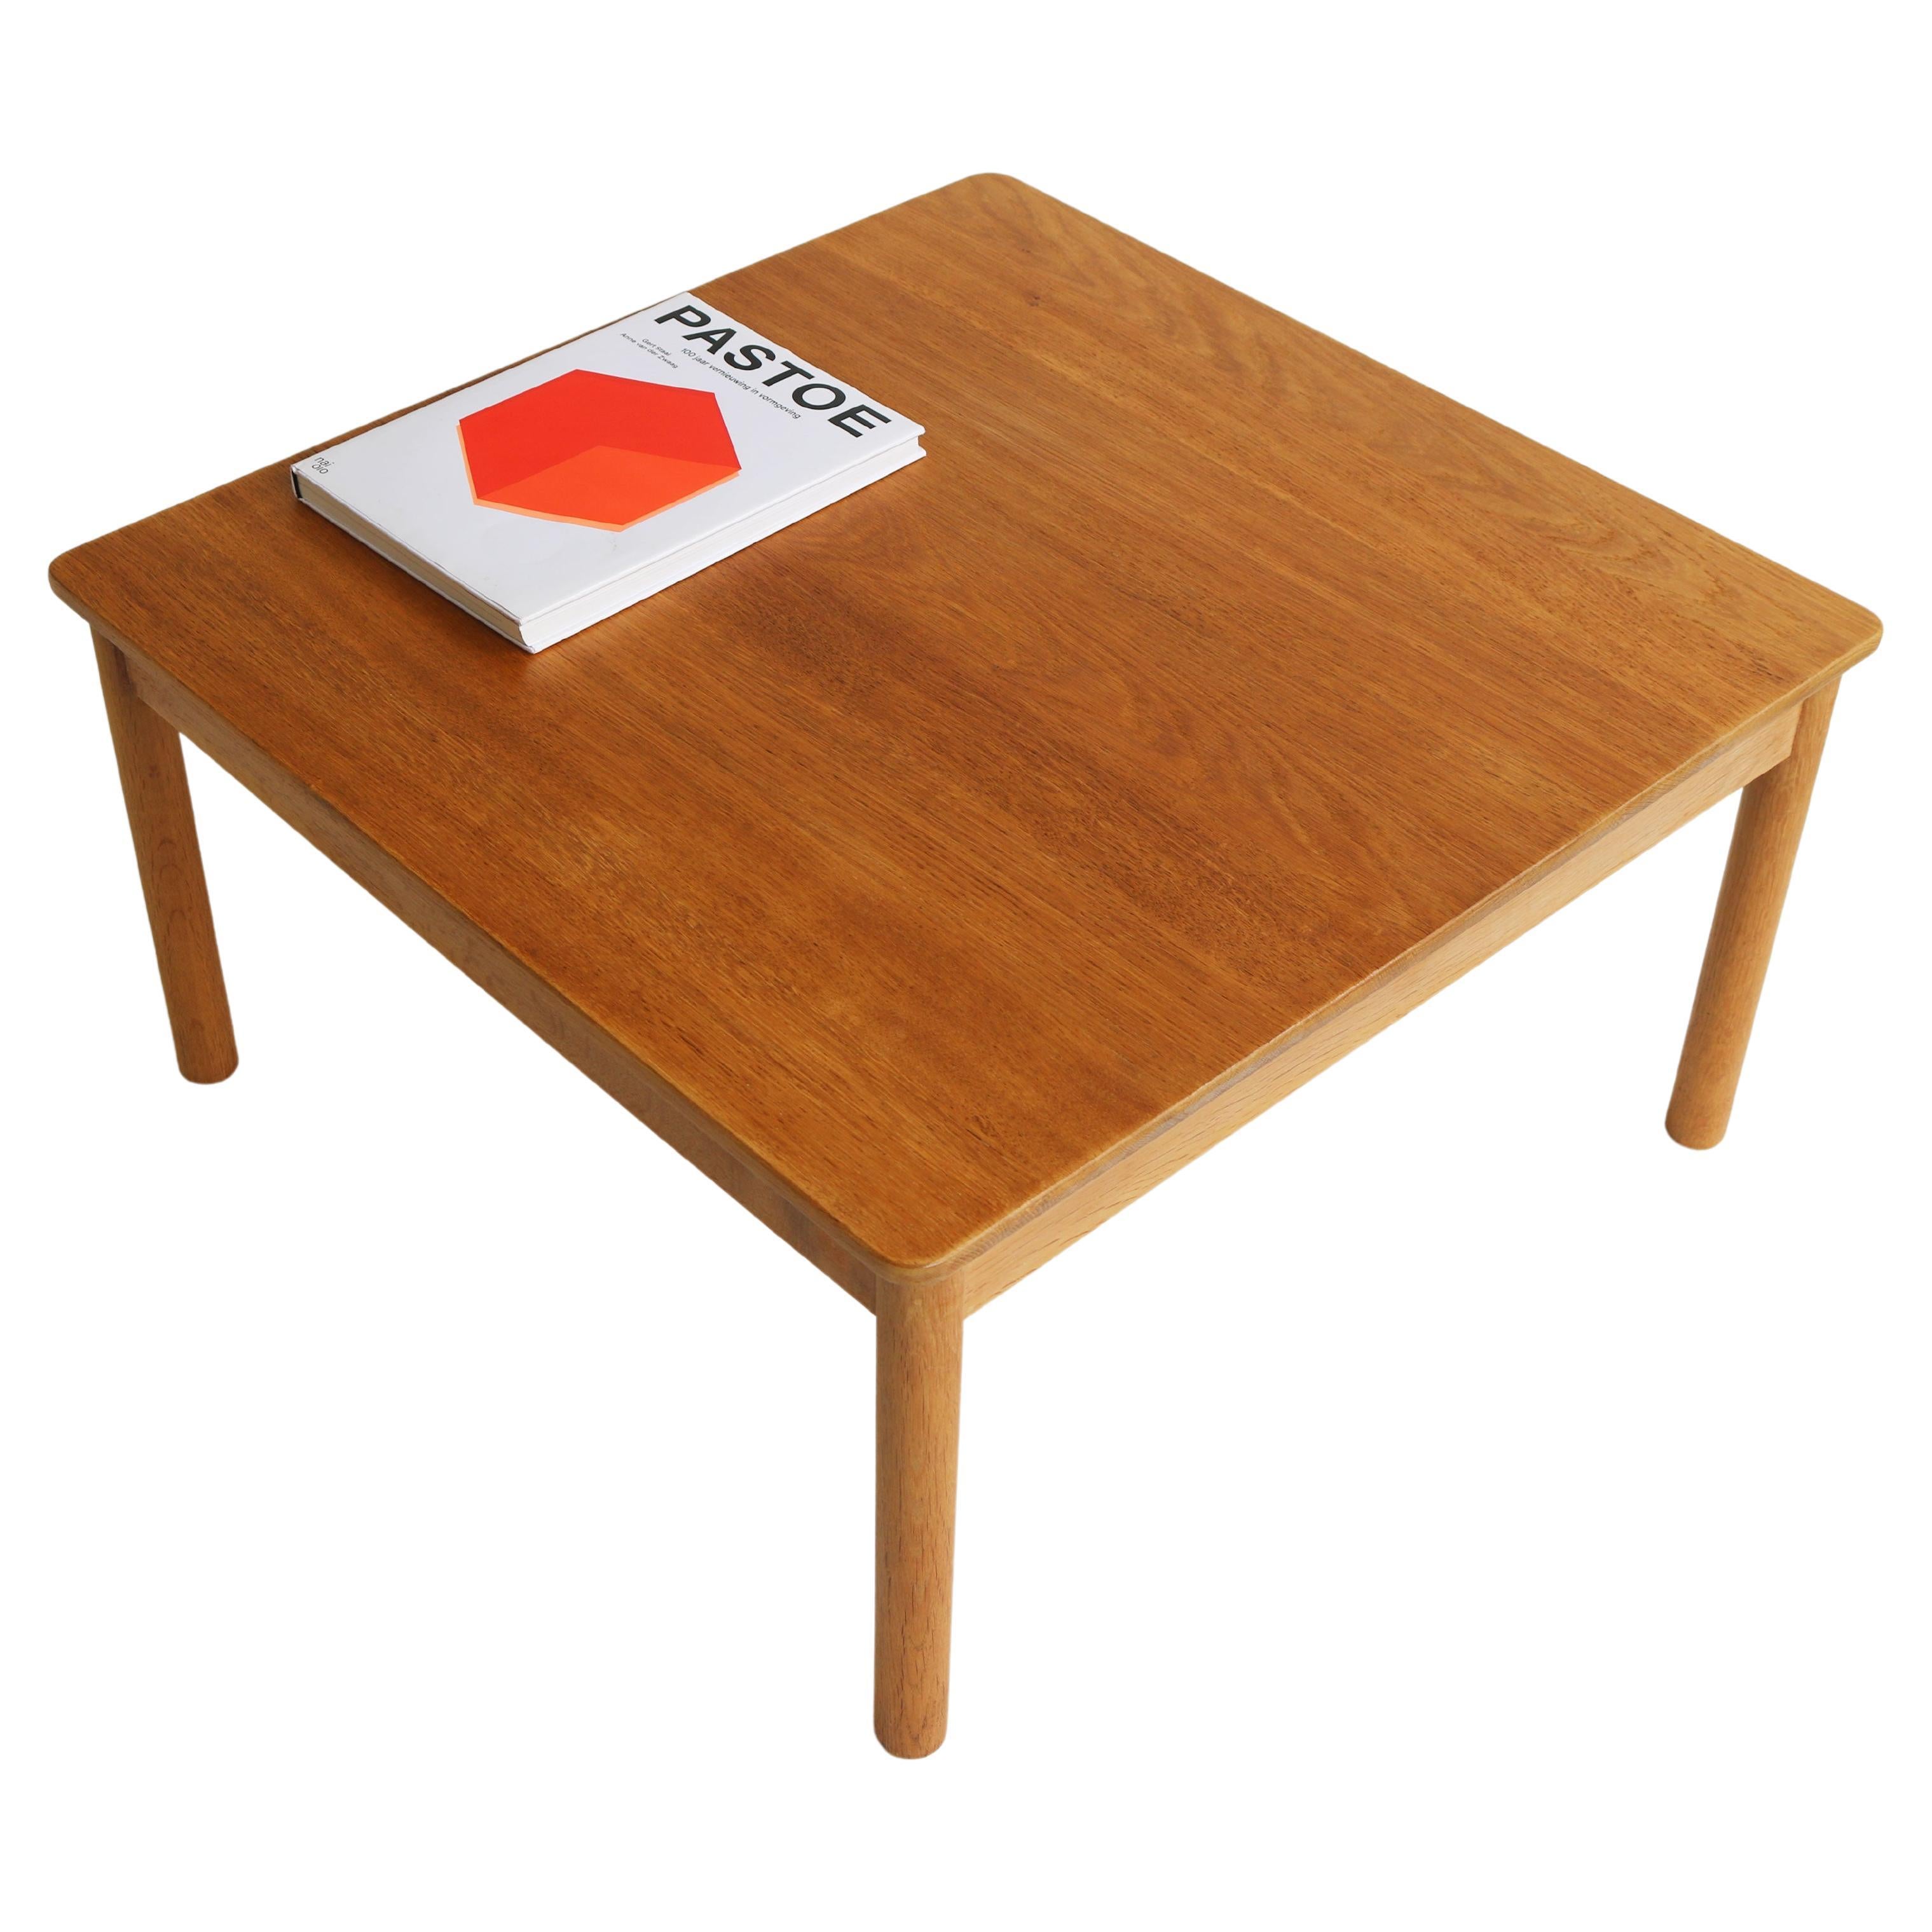 Large solid oak coffee table Model: 5351 by Borge Mogensen for Fredericia 1950